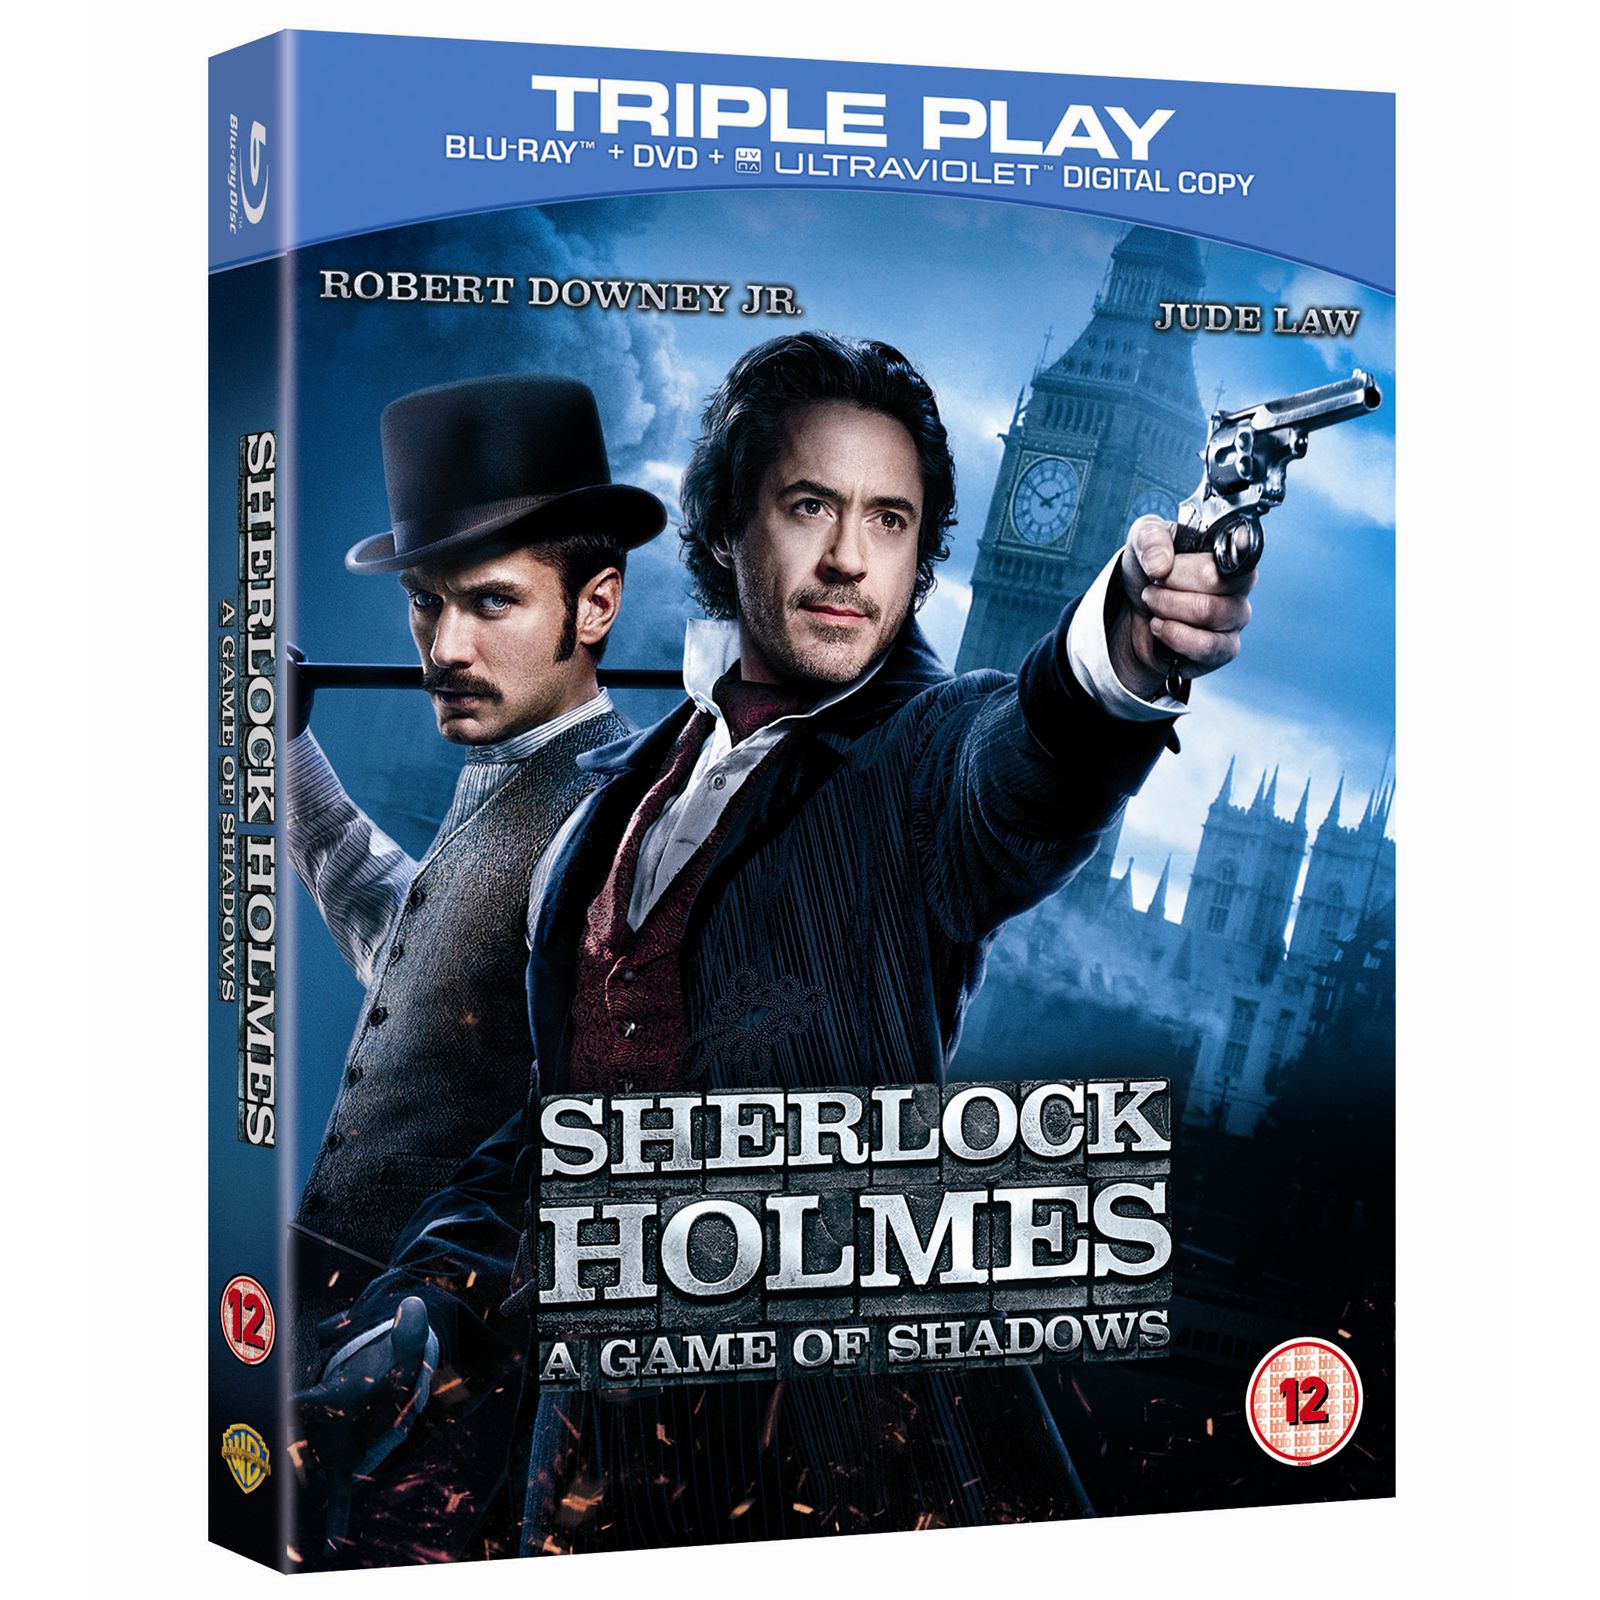 Sherlock Holmes: A Game of Shadows Available on Blu-ray June 12th